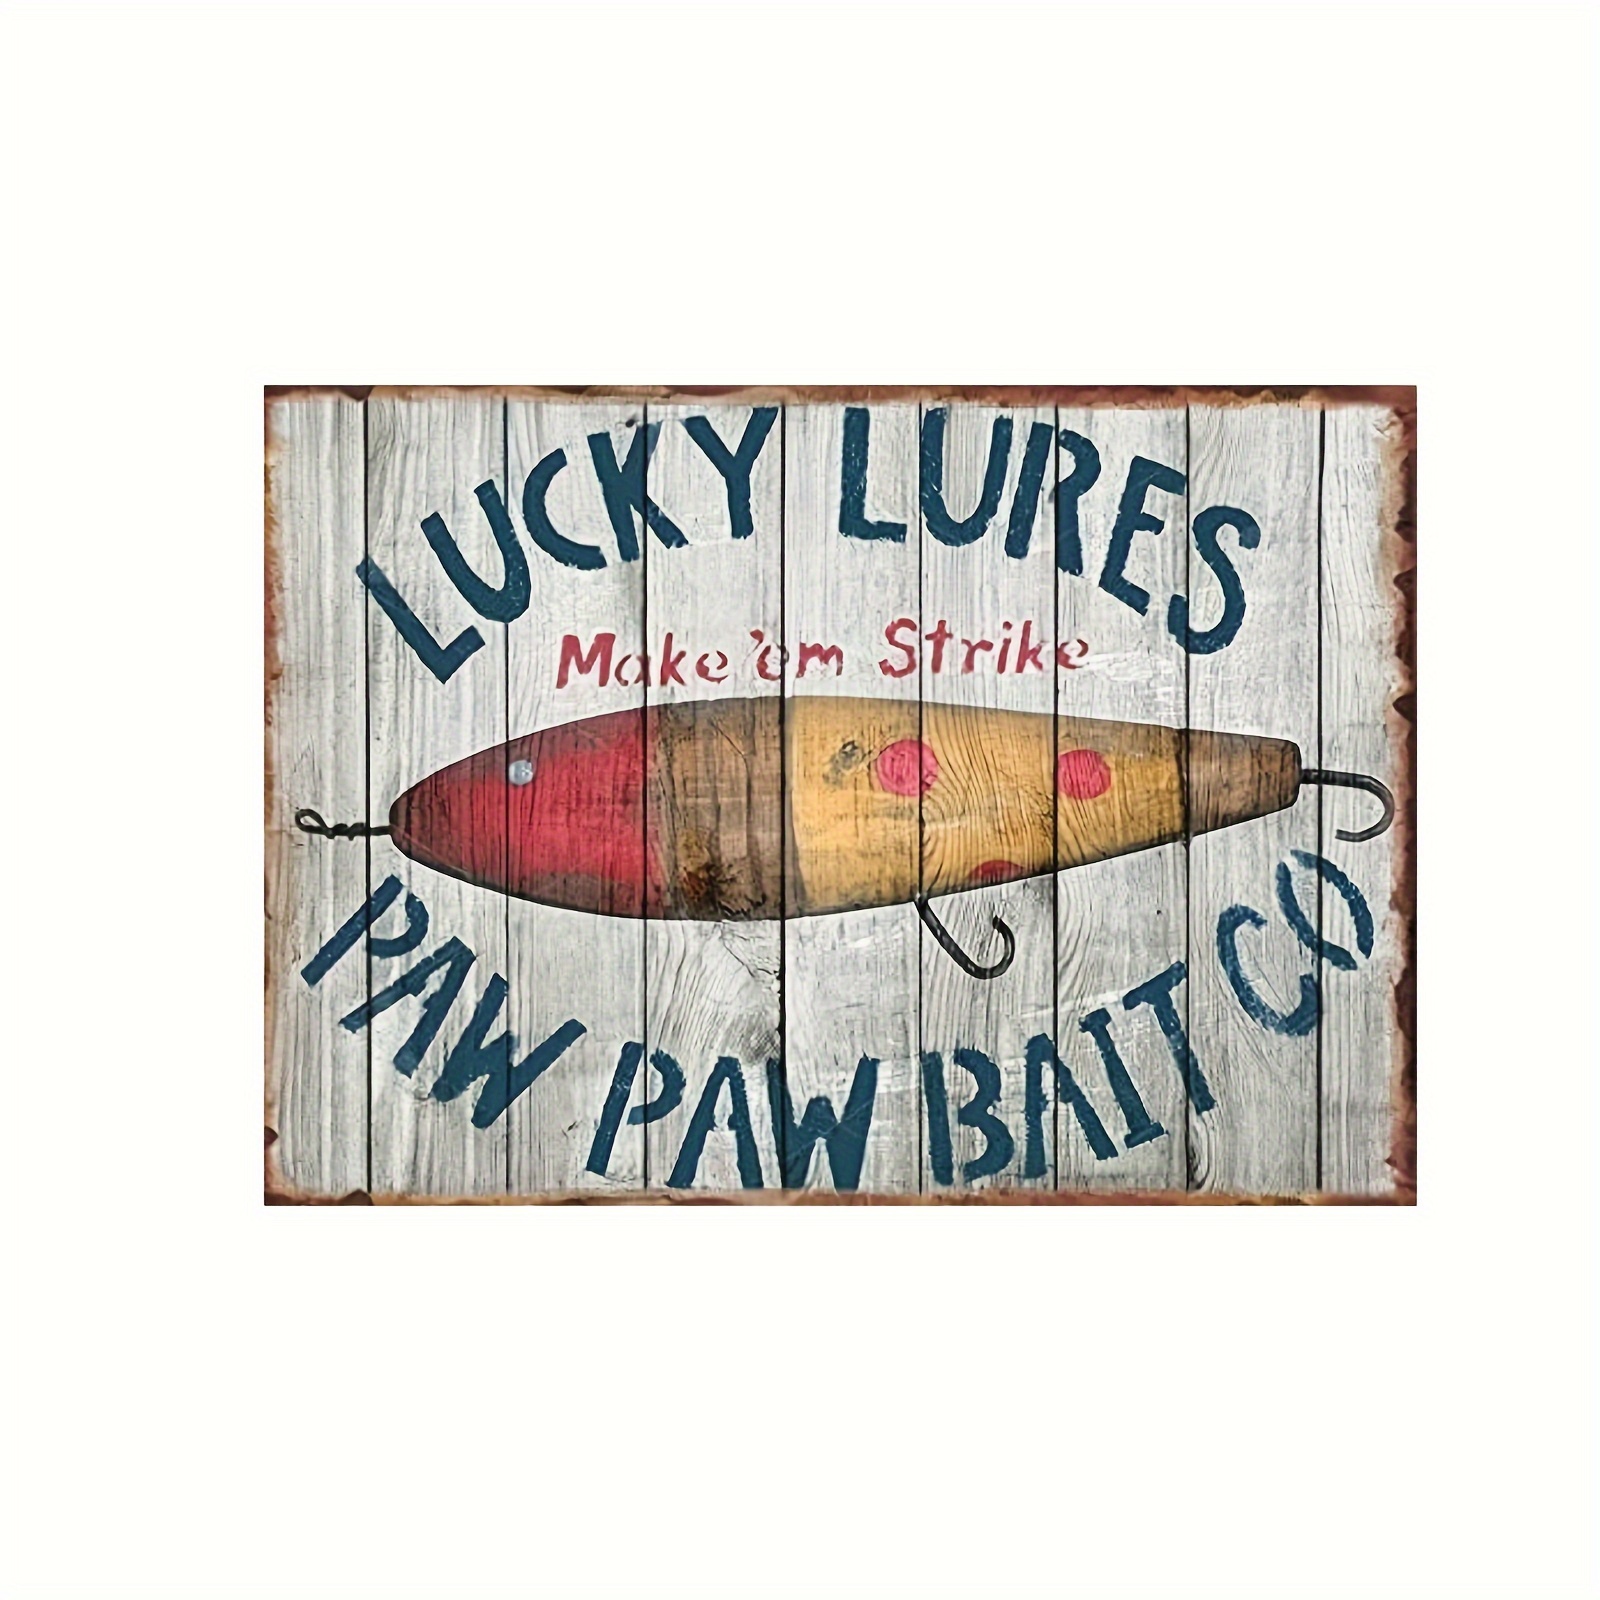 Krouterebs Lucky Lures Fishing Bait Shop Fishing Tackle Vintage Metal Tin  Sign Kitchen Pub Funny Novelty Coffee Bar Wall Poster Garden Farm 12x8 Inch